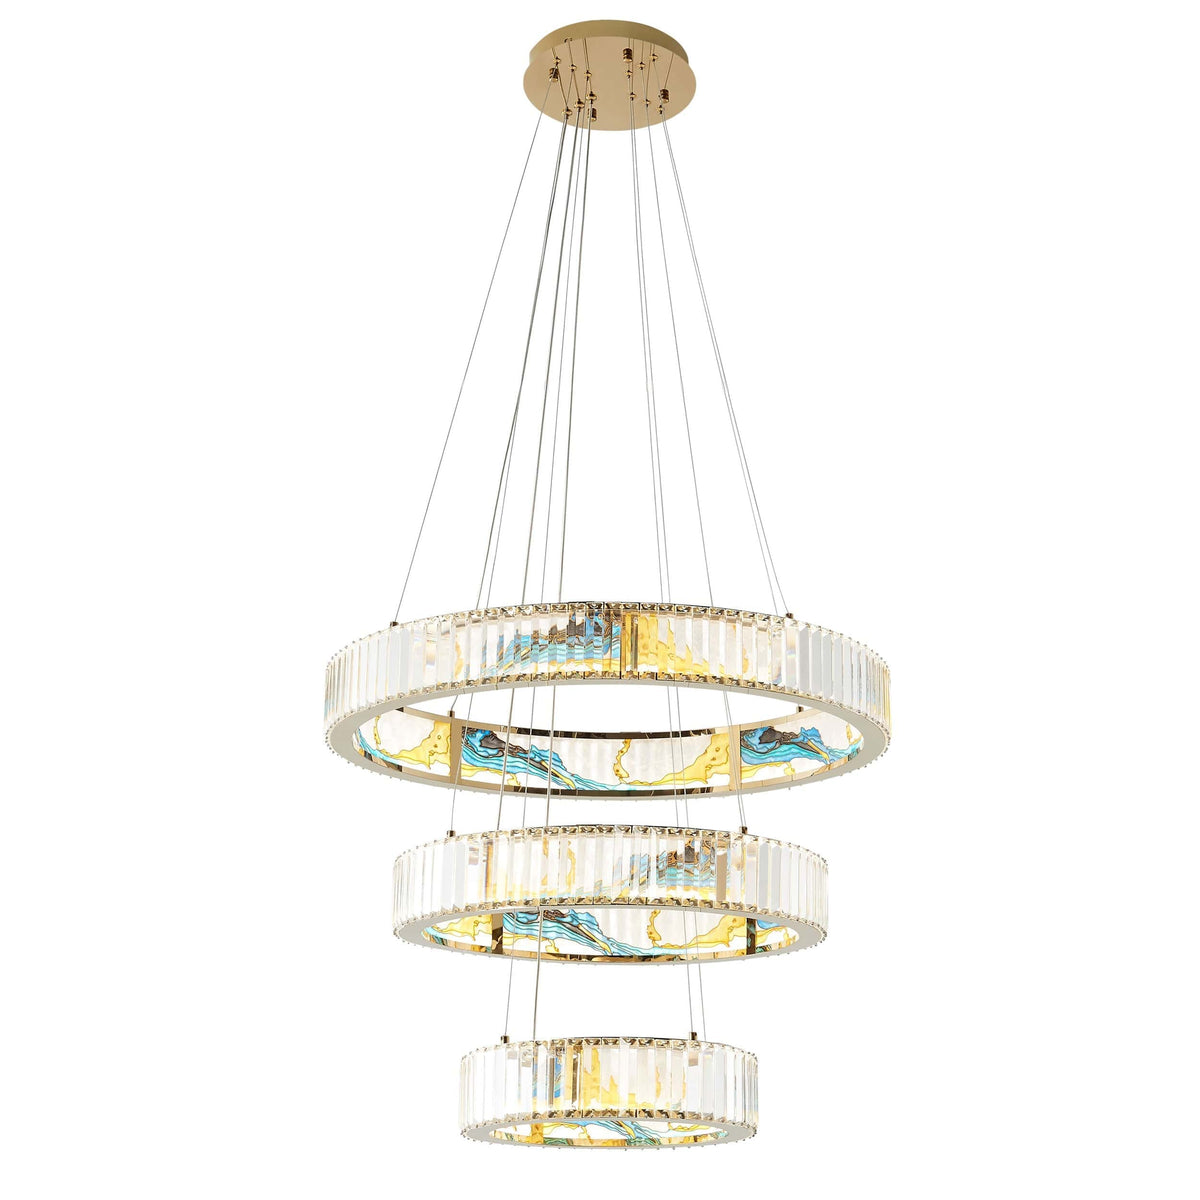 Boeseman's Colorful Chandelier / Three Tiers / Round